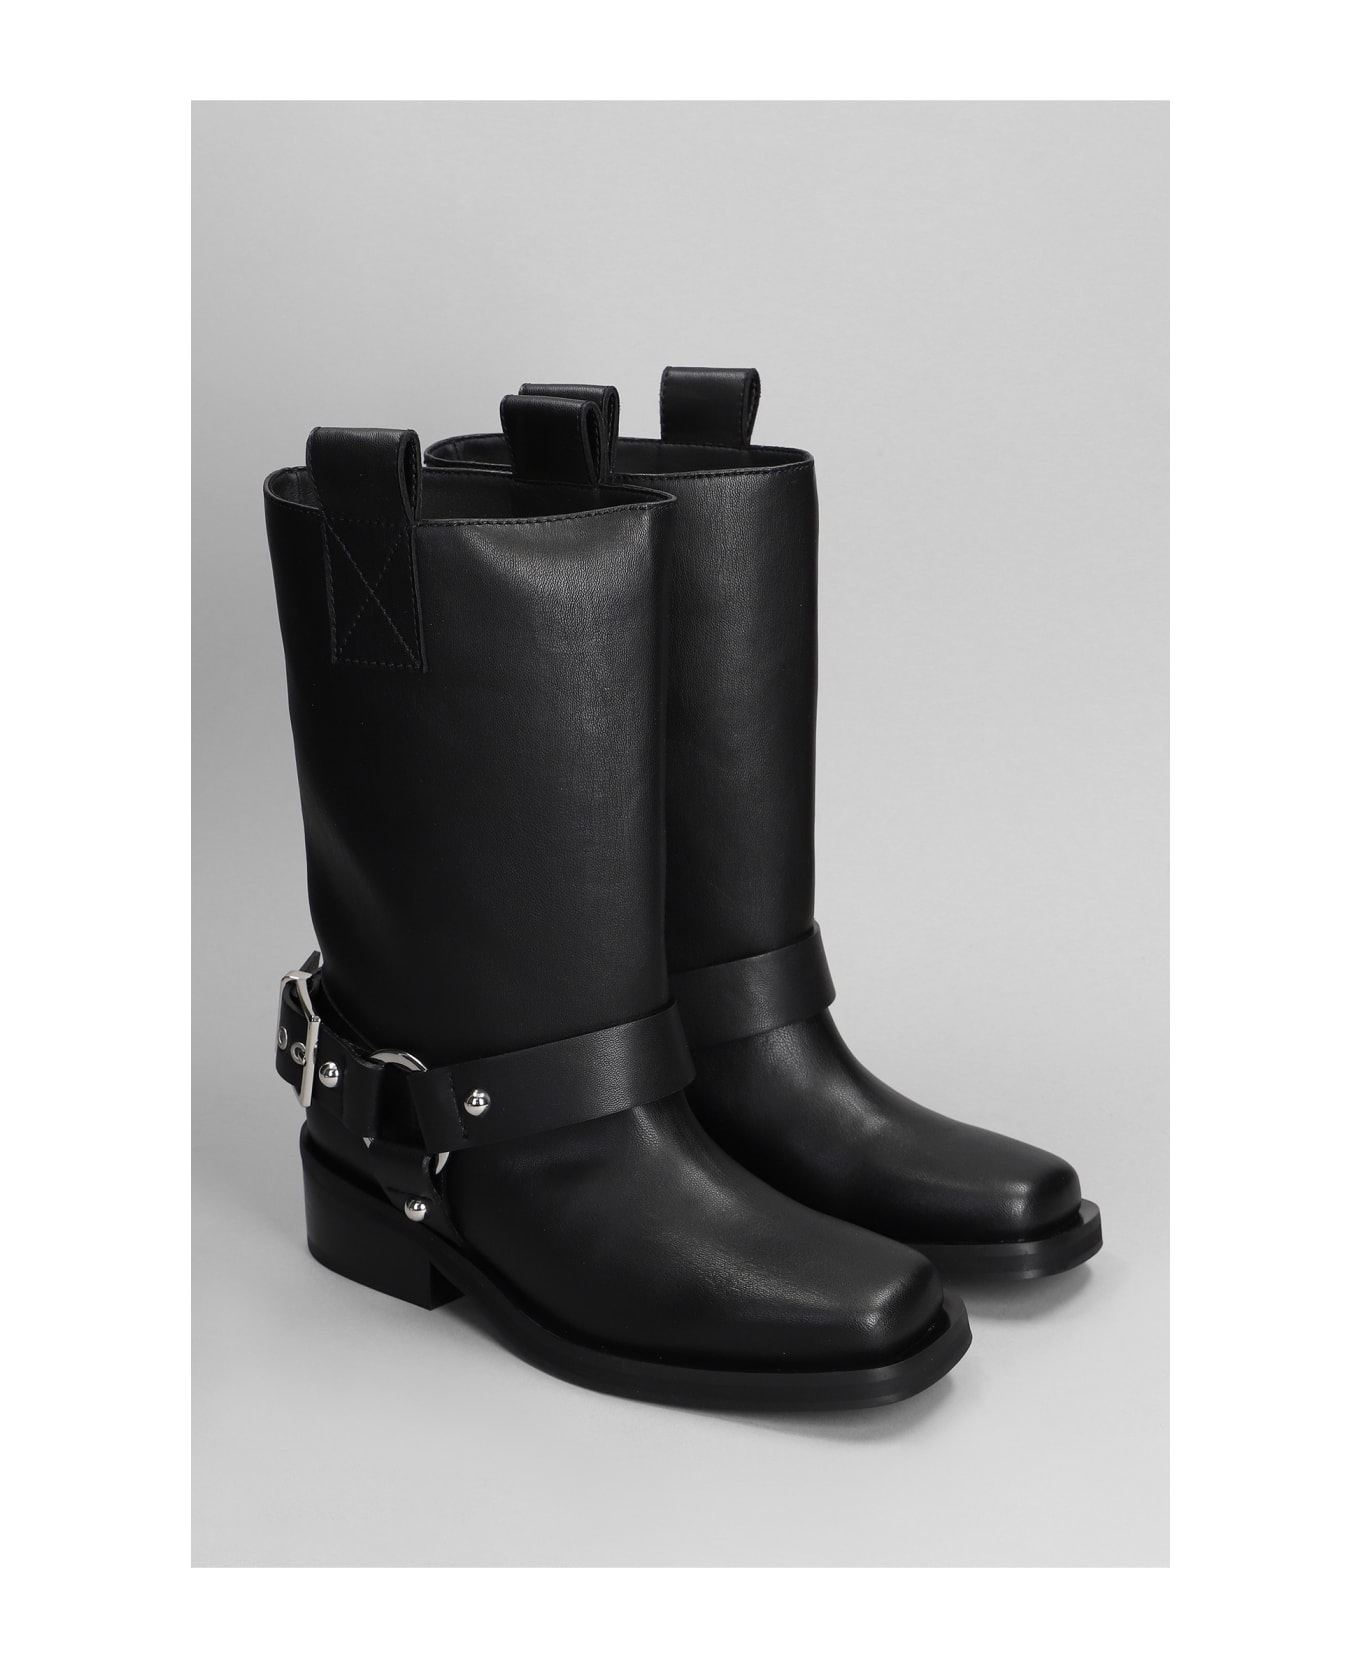 Ganni Boots In Black Synthetic Leather - black ブーツ